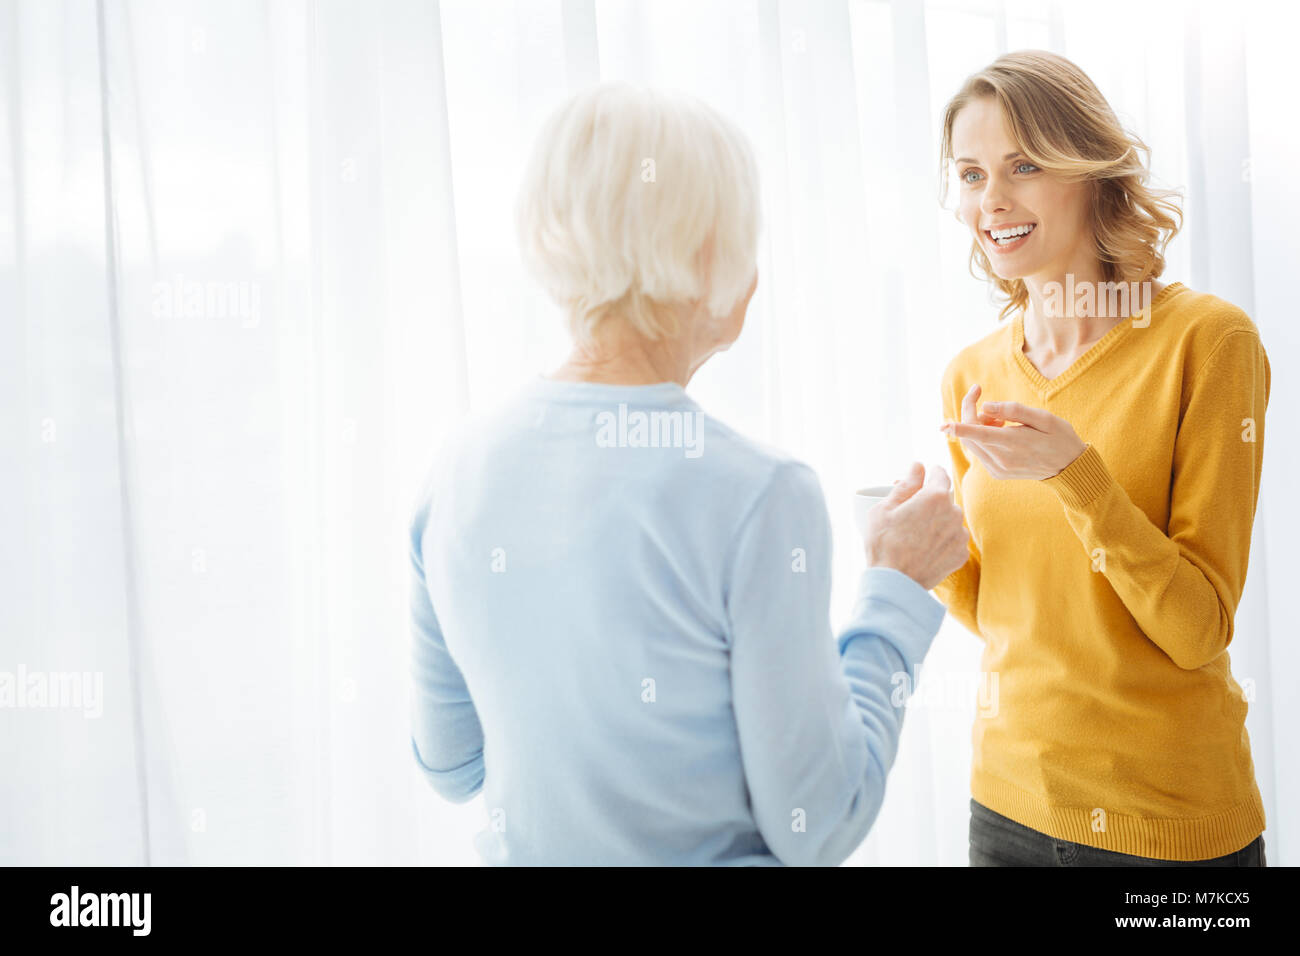 Two emotional women being involved in a lovely talk and smiling Stock Photo